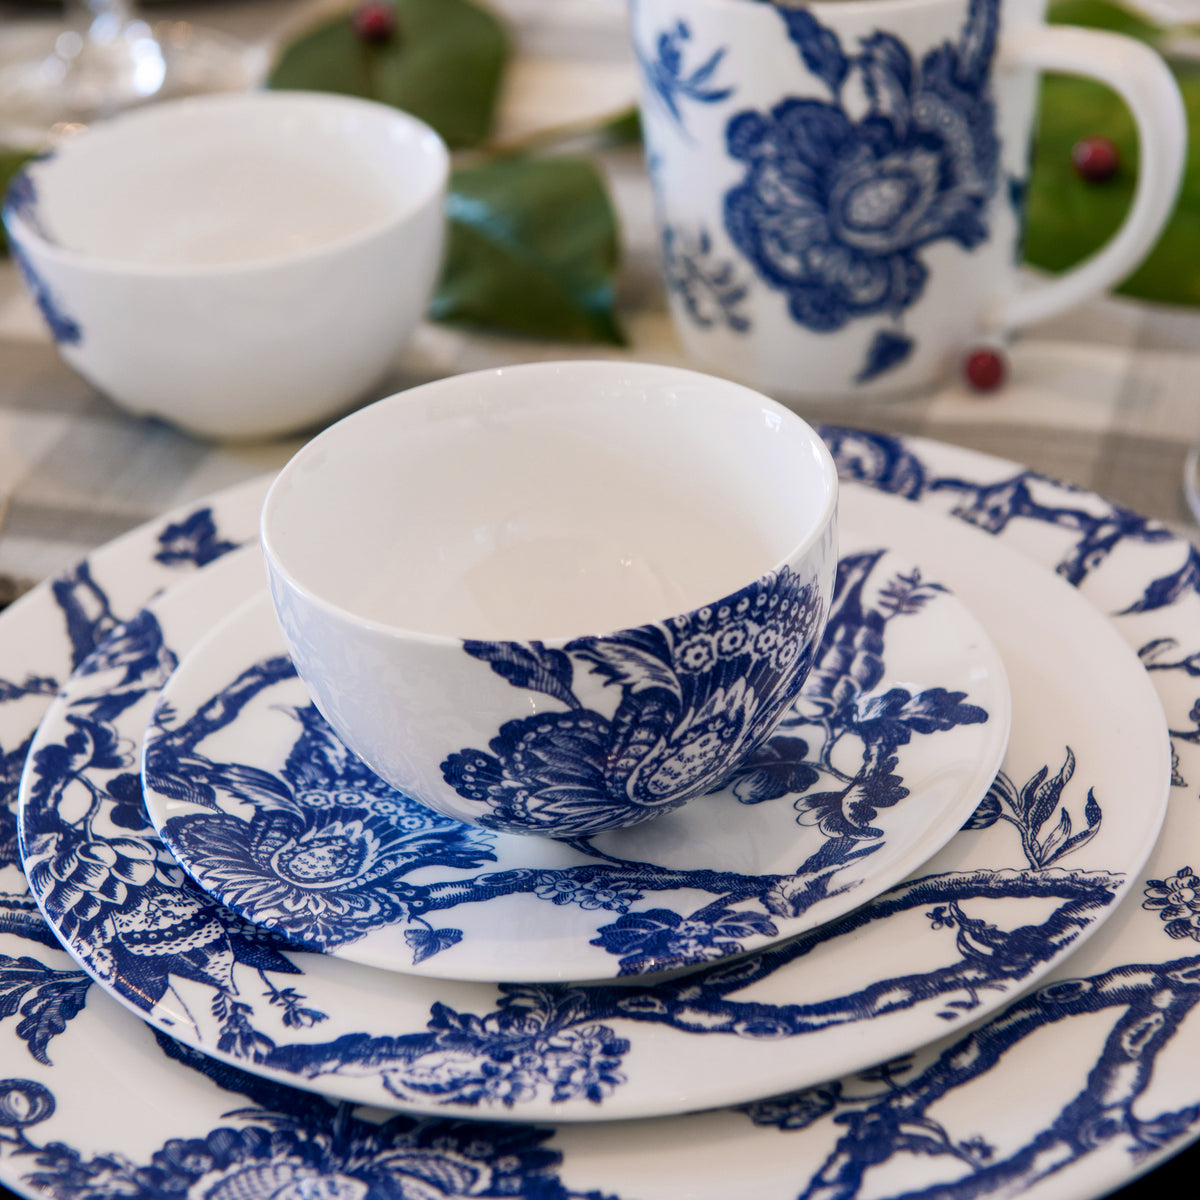 A set of heirloom-quality dinnerware featuring white ceramic dishes with blue floral patterns, including a bowl, plates, and a cup, all arranged on a checkered tablecloth with a green leaf decoration. This premium porcelain Arcadia Small Plates by Caskata Artisanal Home are both dishwasher and microwave safe.